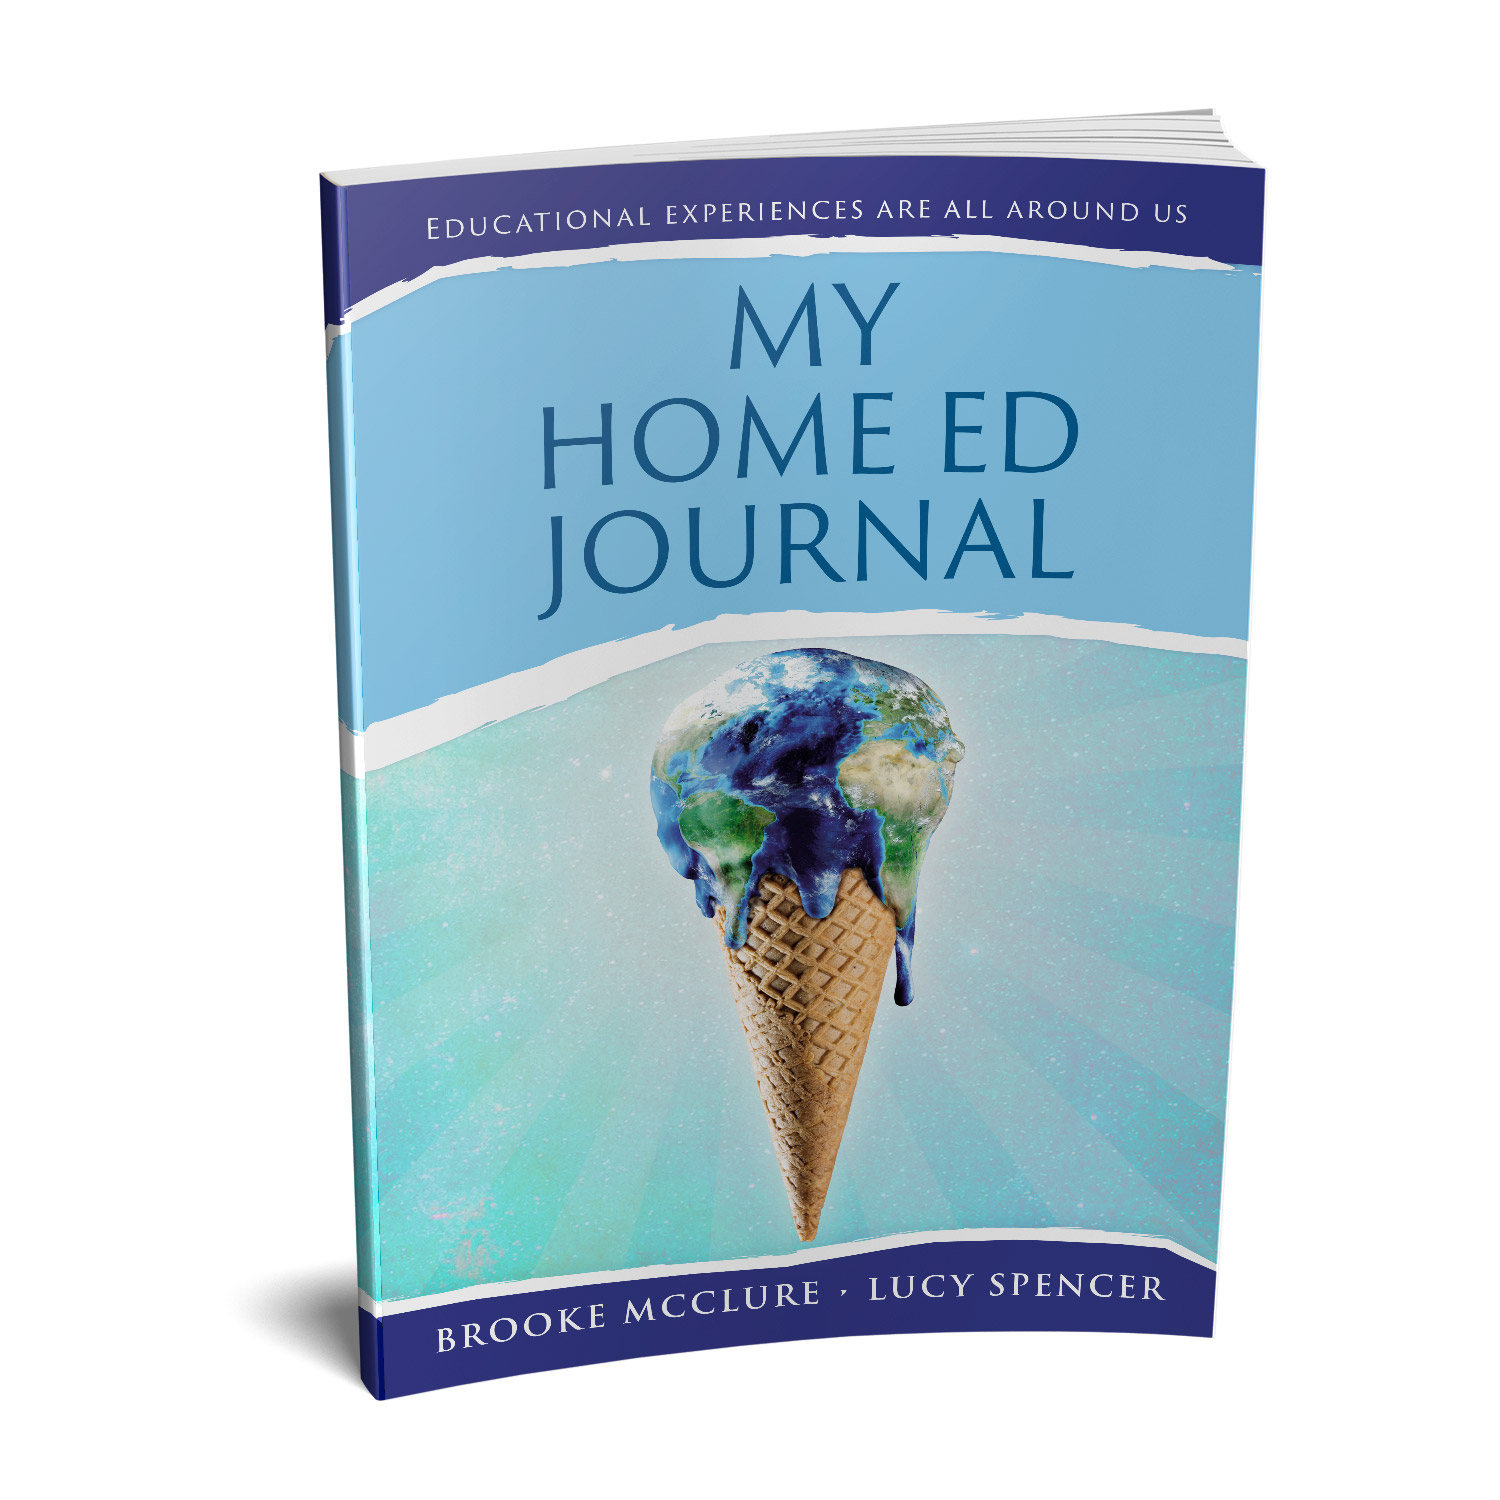 'My Home Ed Journal' is a unique, educational tool that tracks the progress of home-educated children. The authors are Brooke McClure and Lucy Spencer. The book cover and interior design are by Mark Thomas. To learn more about what Mark could do for your book, please visit coverness.com.